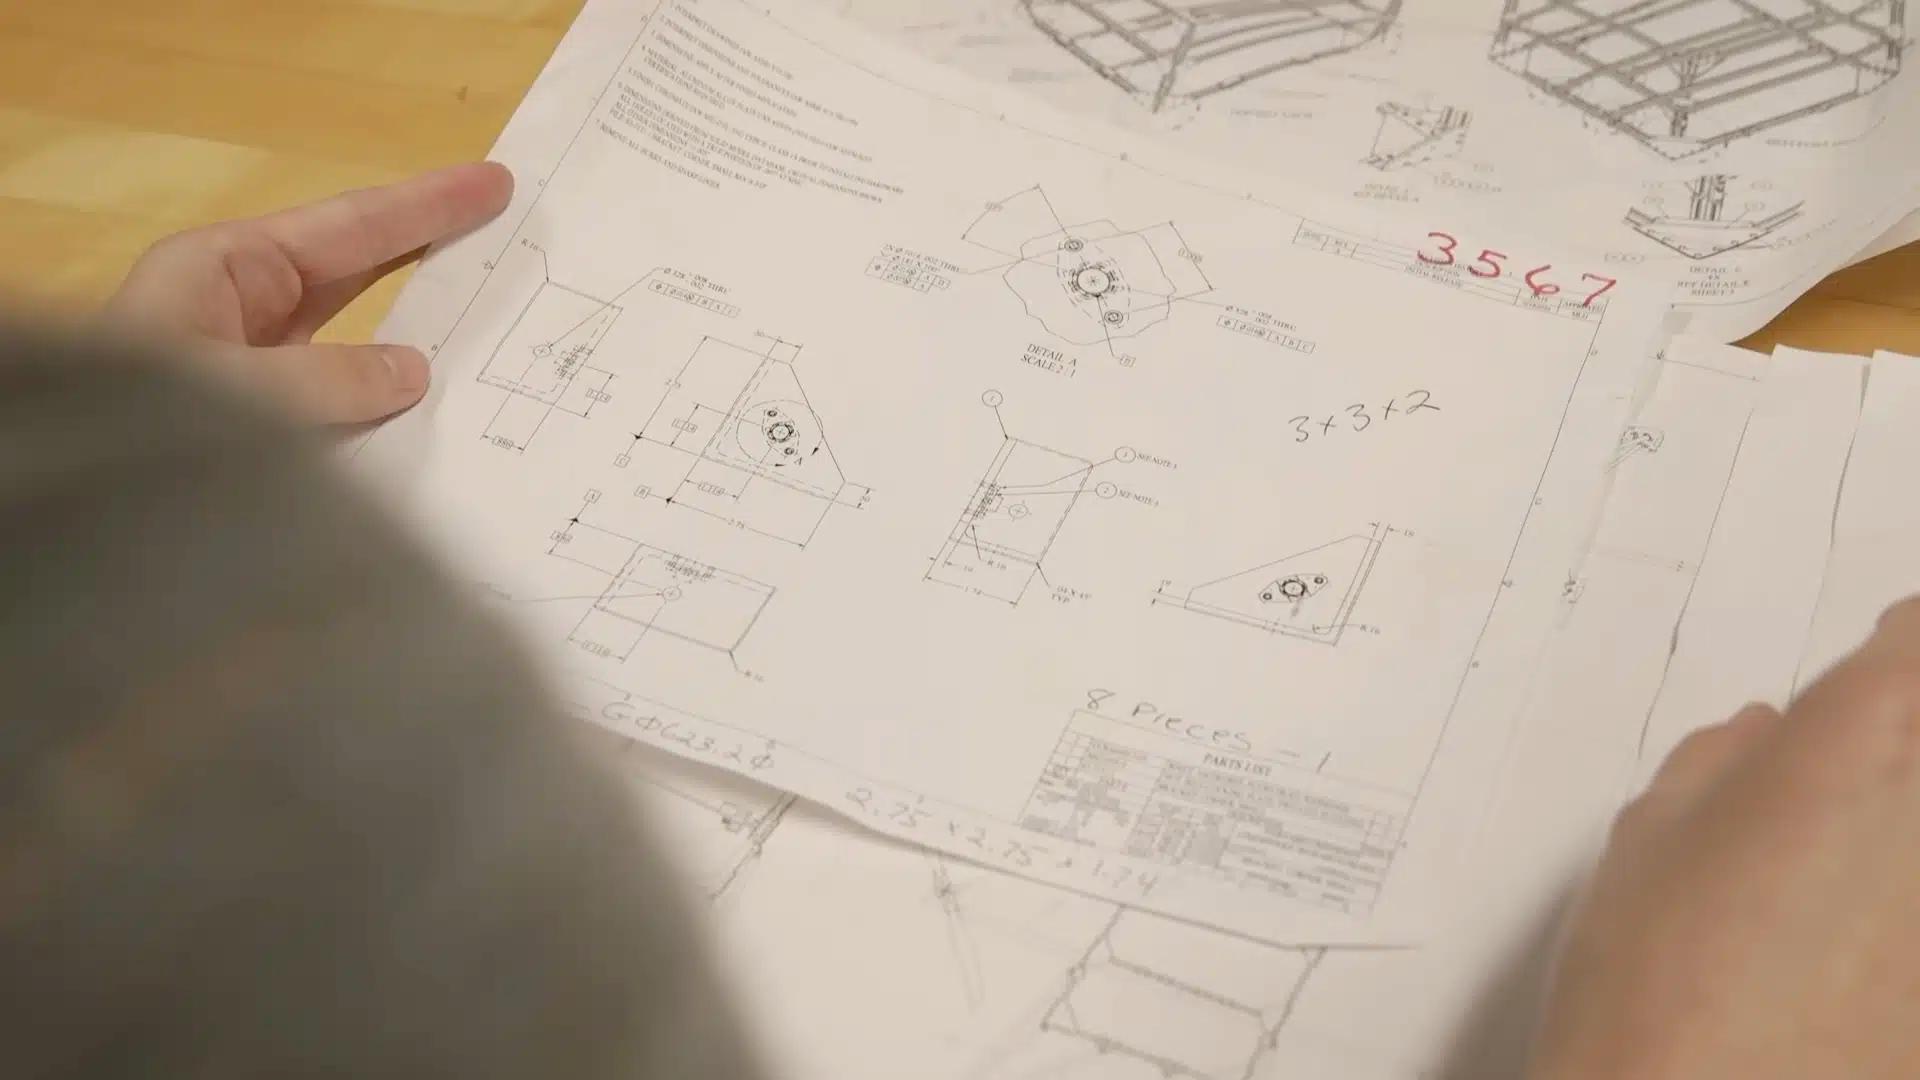 A view of a person holding blueprints.